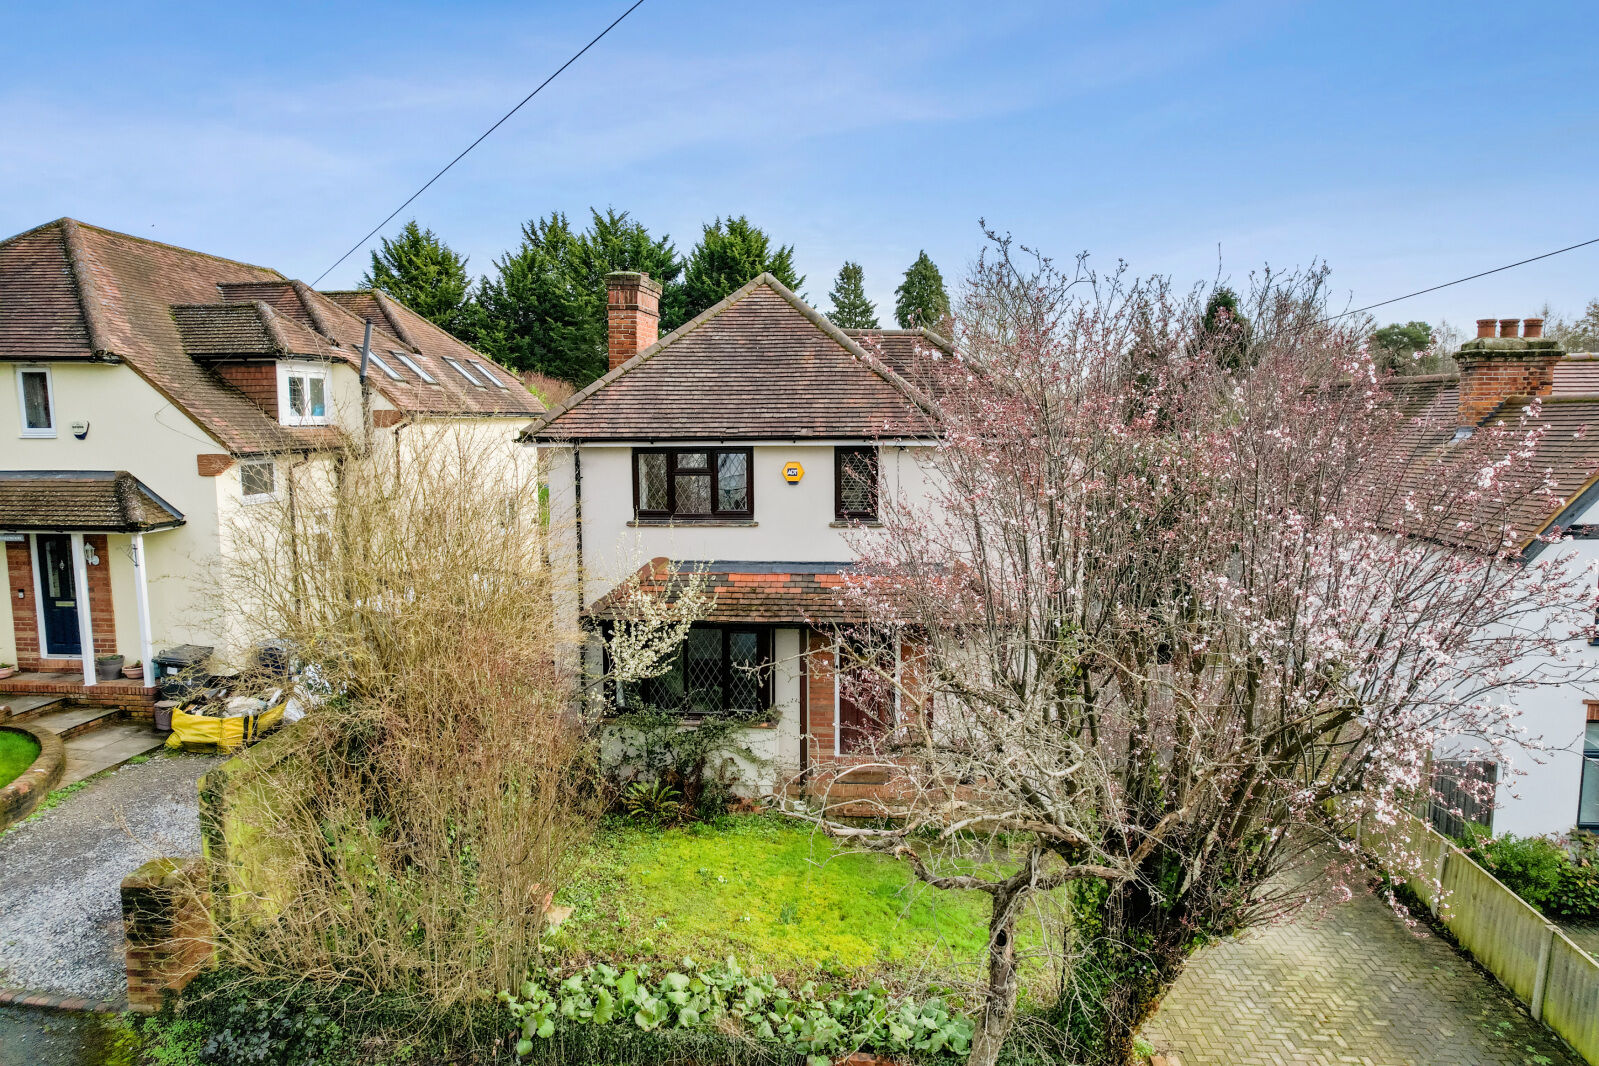 4 bedroom detached house for sale Park Farm Road, High Wycombe, HP12, main image